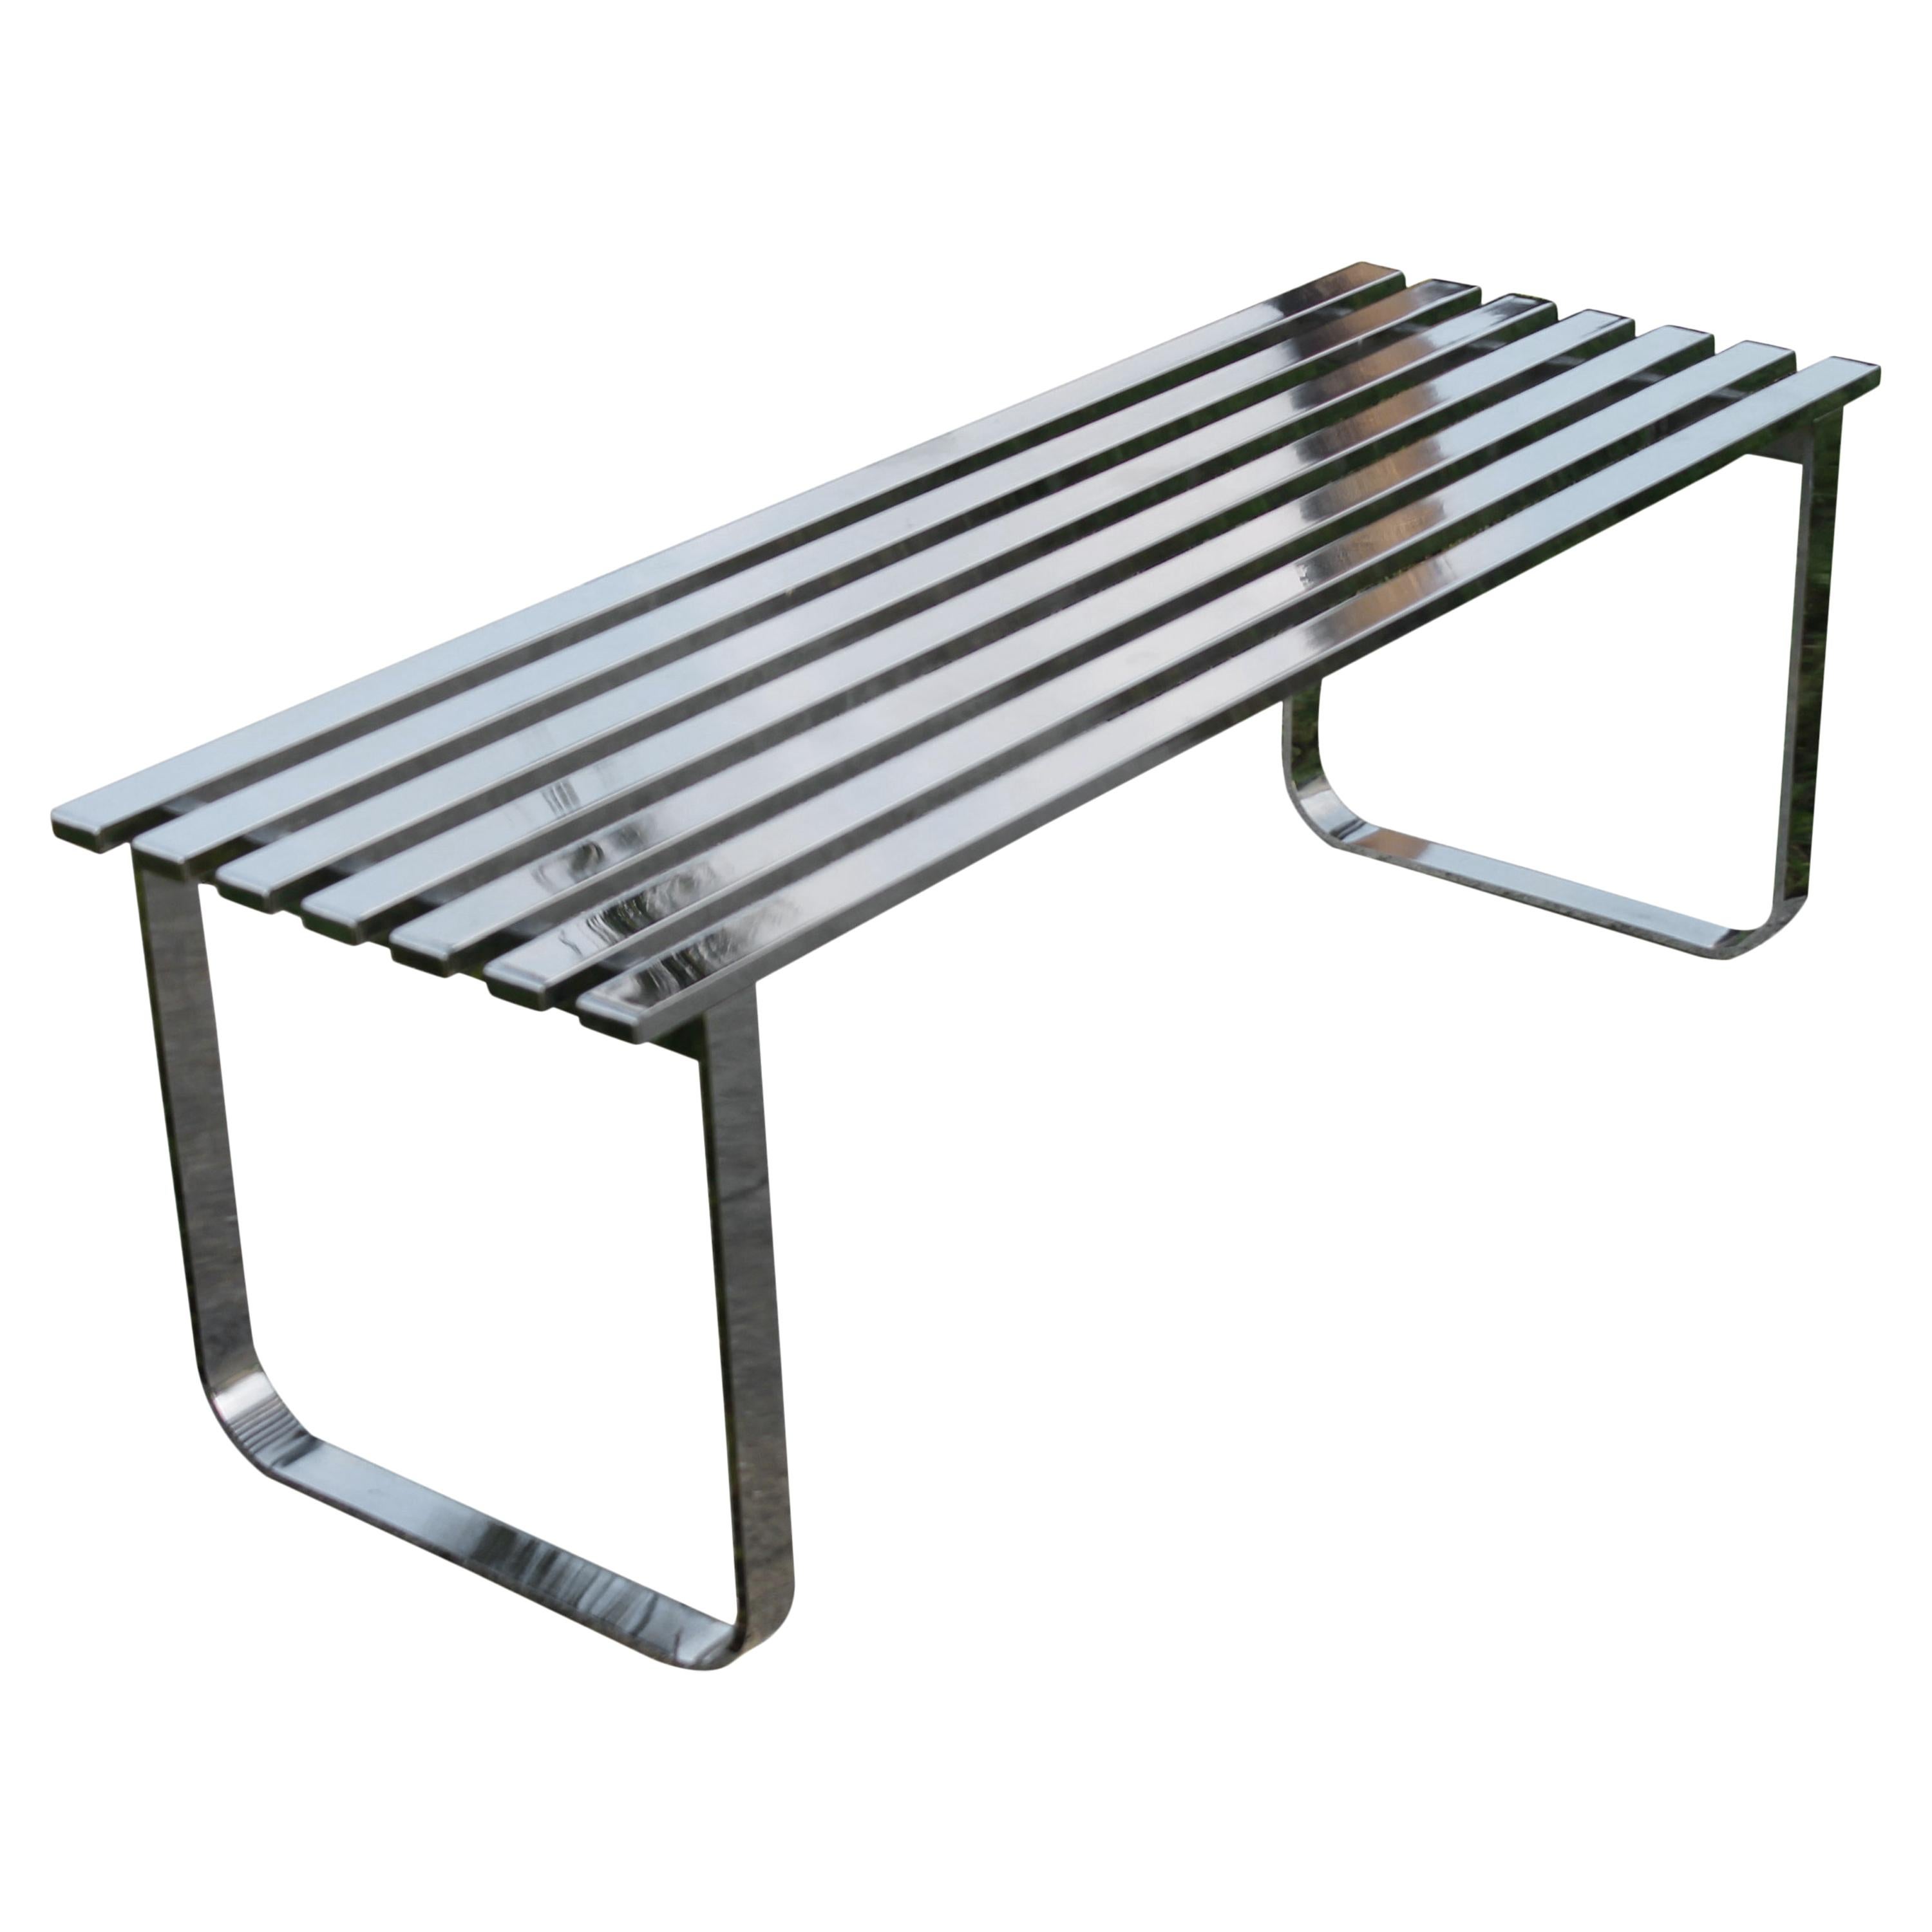 Vintage DIA Design Institute of America Chrome Slat Bench or Coffee Table, Stele